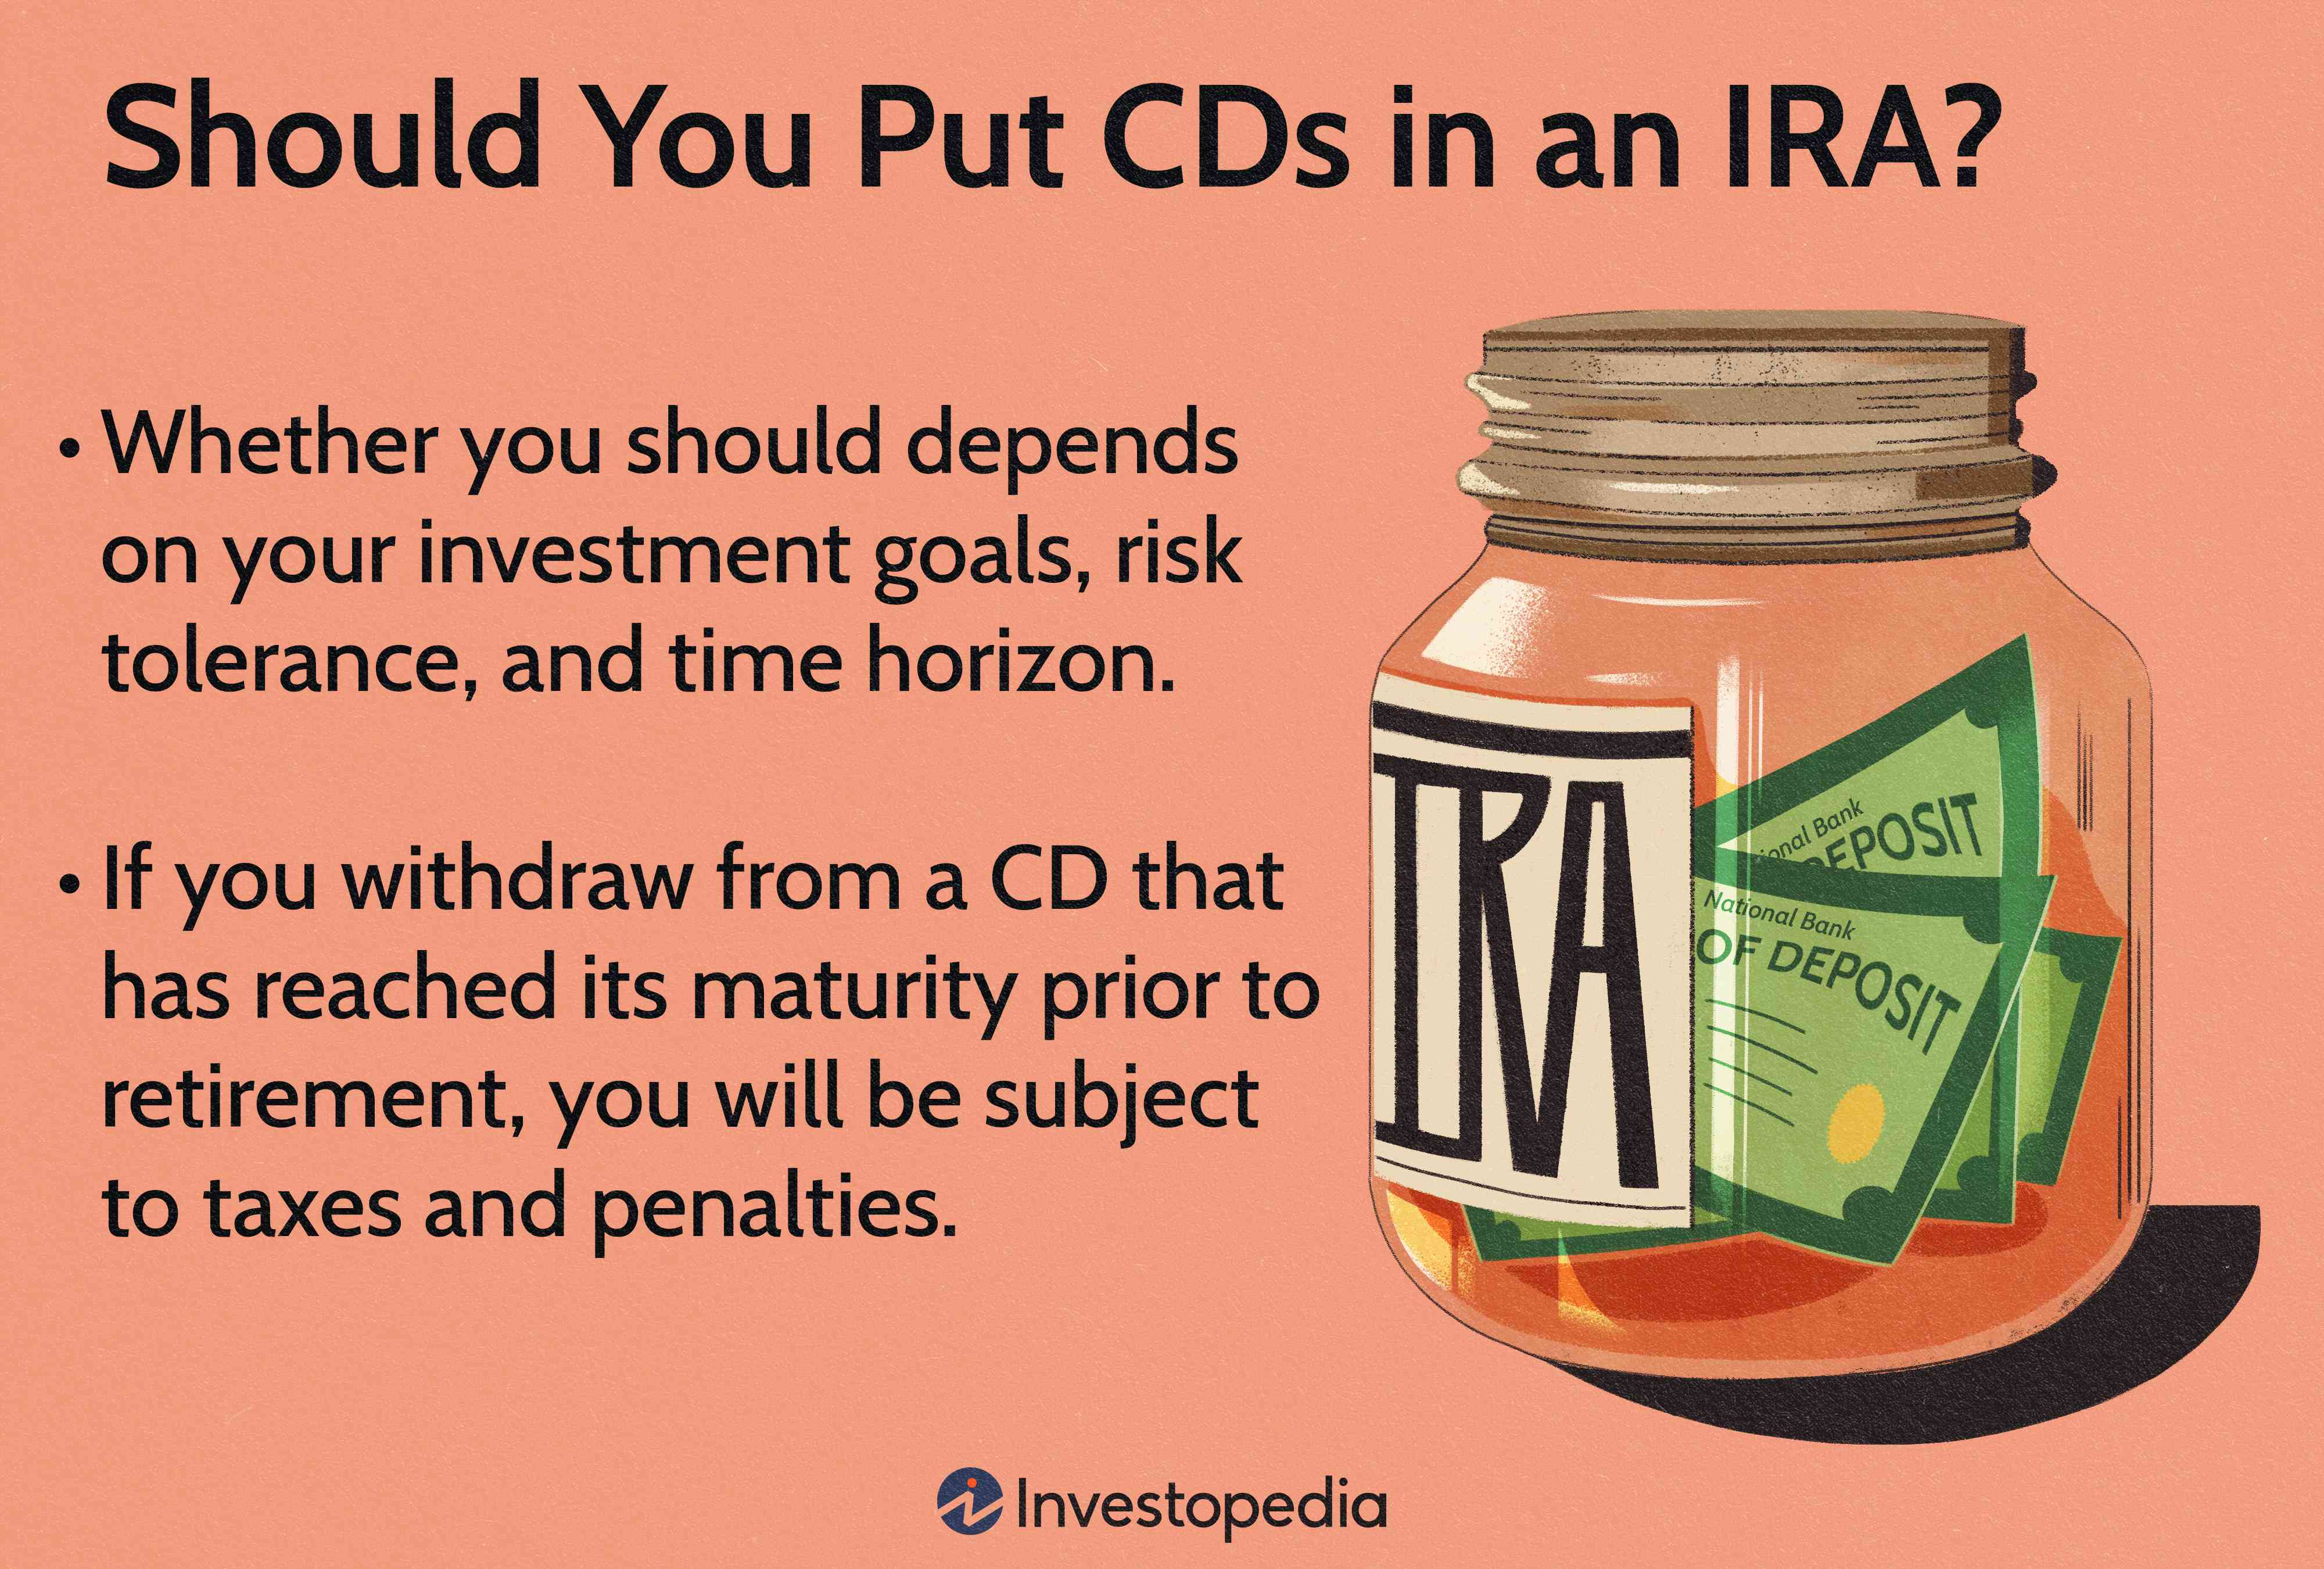 Should You Put CDs in an IRA?